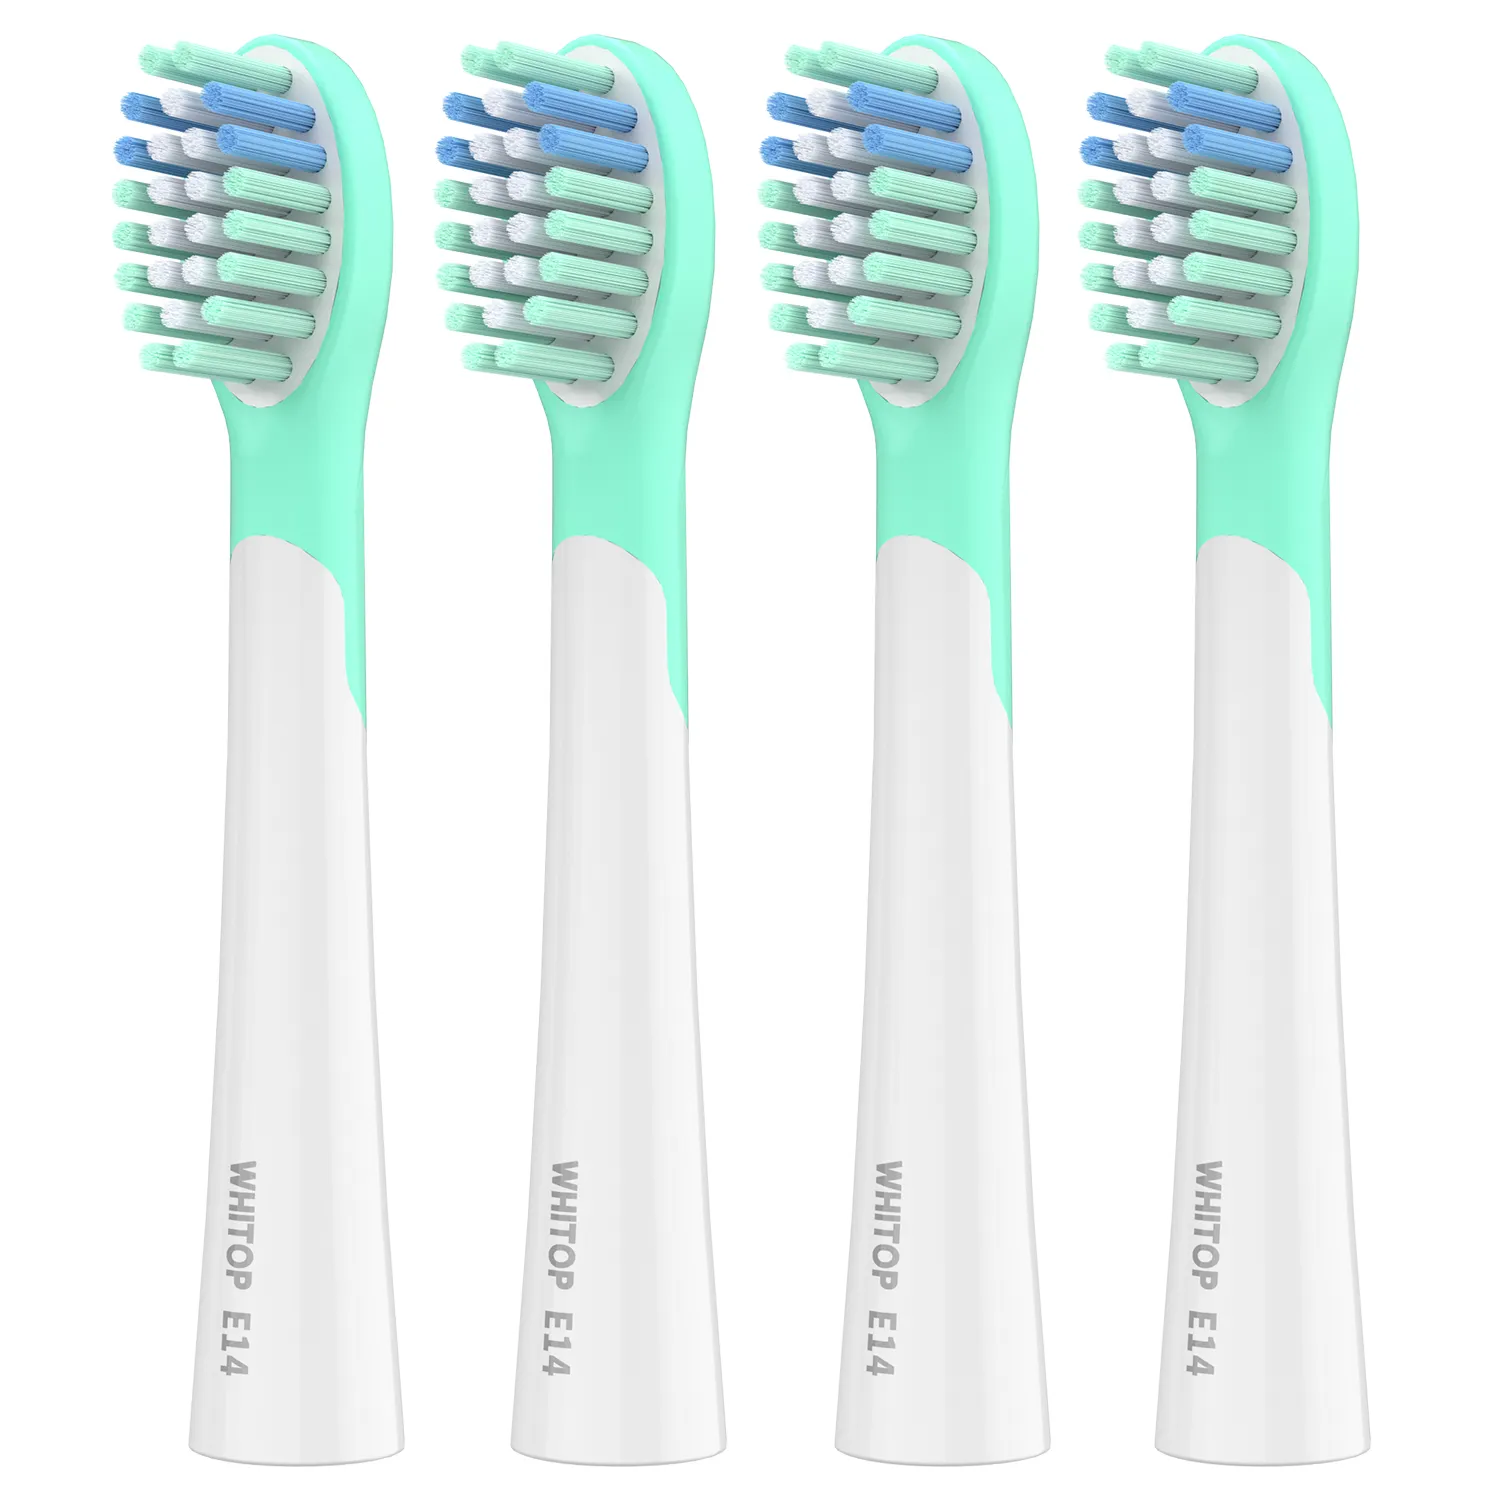 WHITOP Kids Sonic Electric Toothbrush Replacement Brush Heads for Children Gentle Cleaning Type Bristles 4 Pack E14 Green